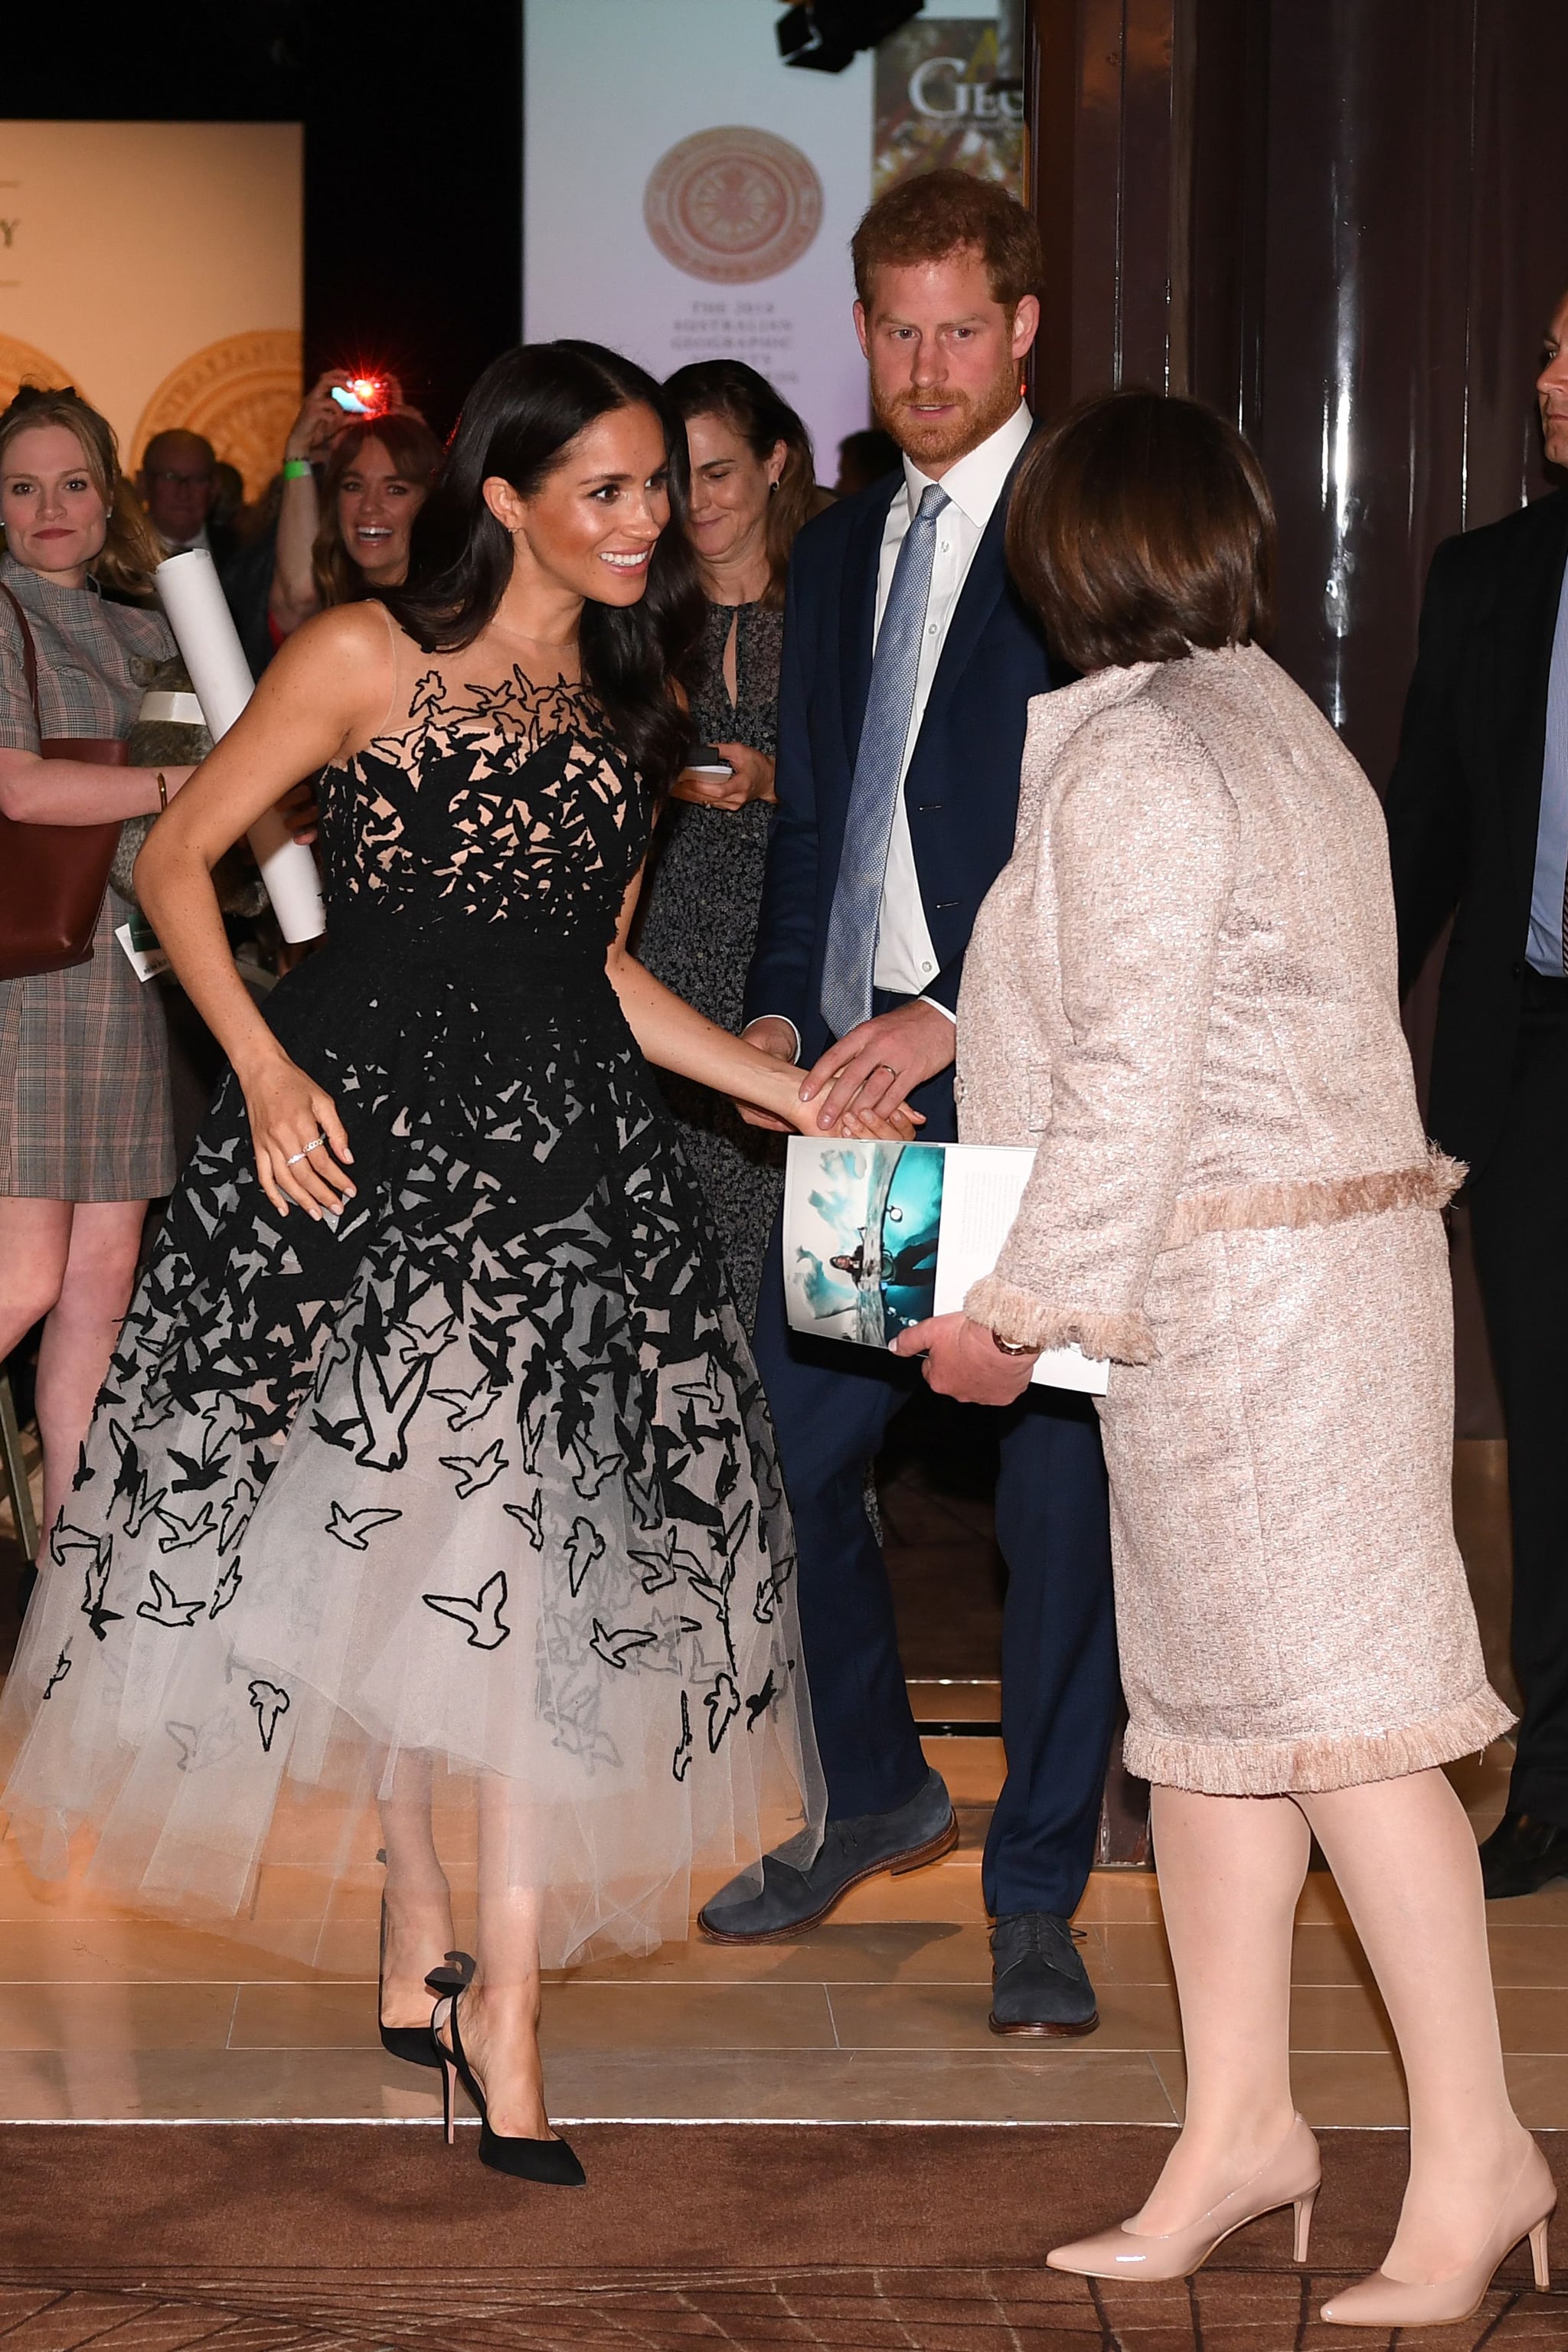 Meghan Markle's 7 rare royal gown moments – special story revealed | HELLO!